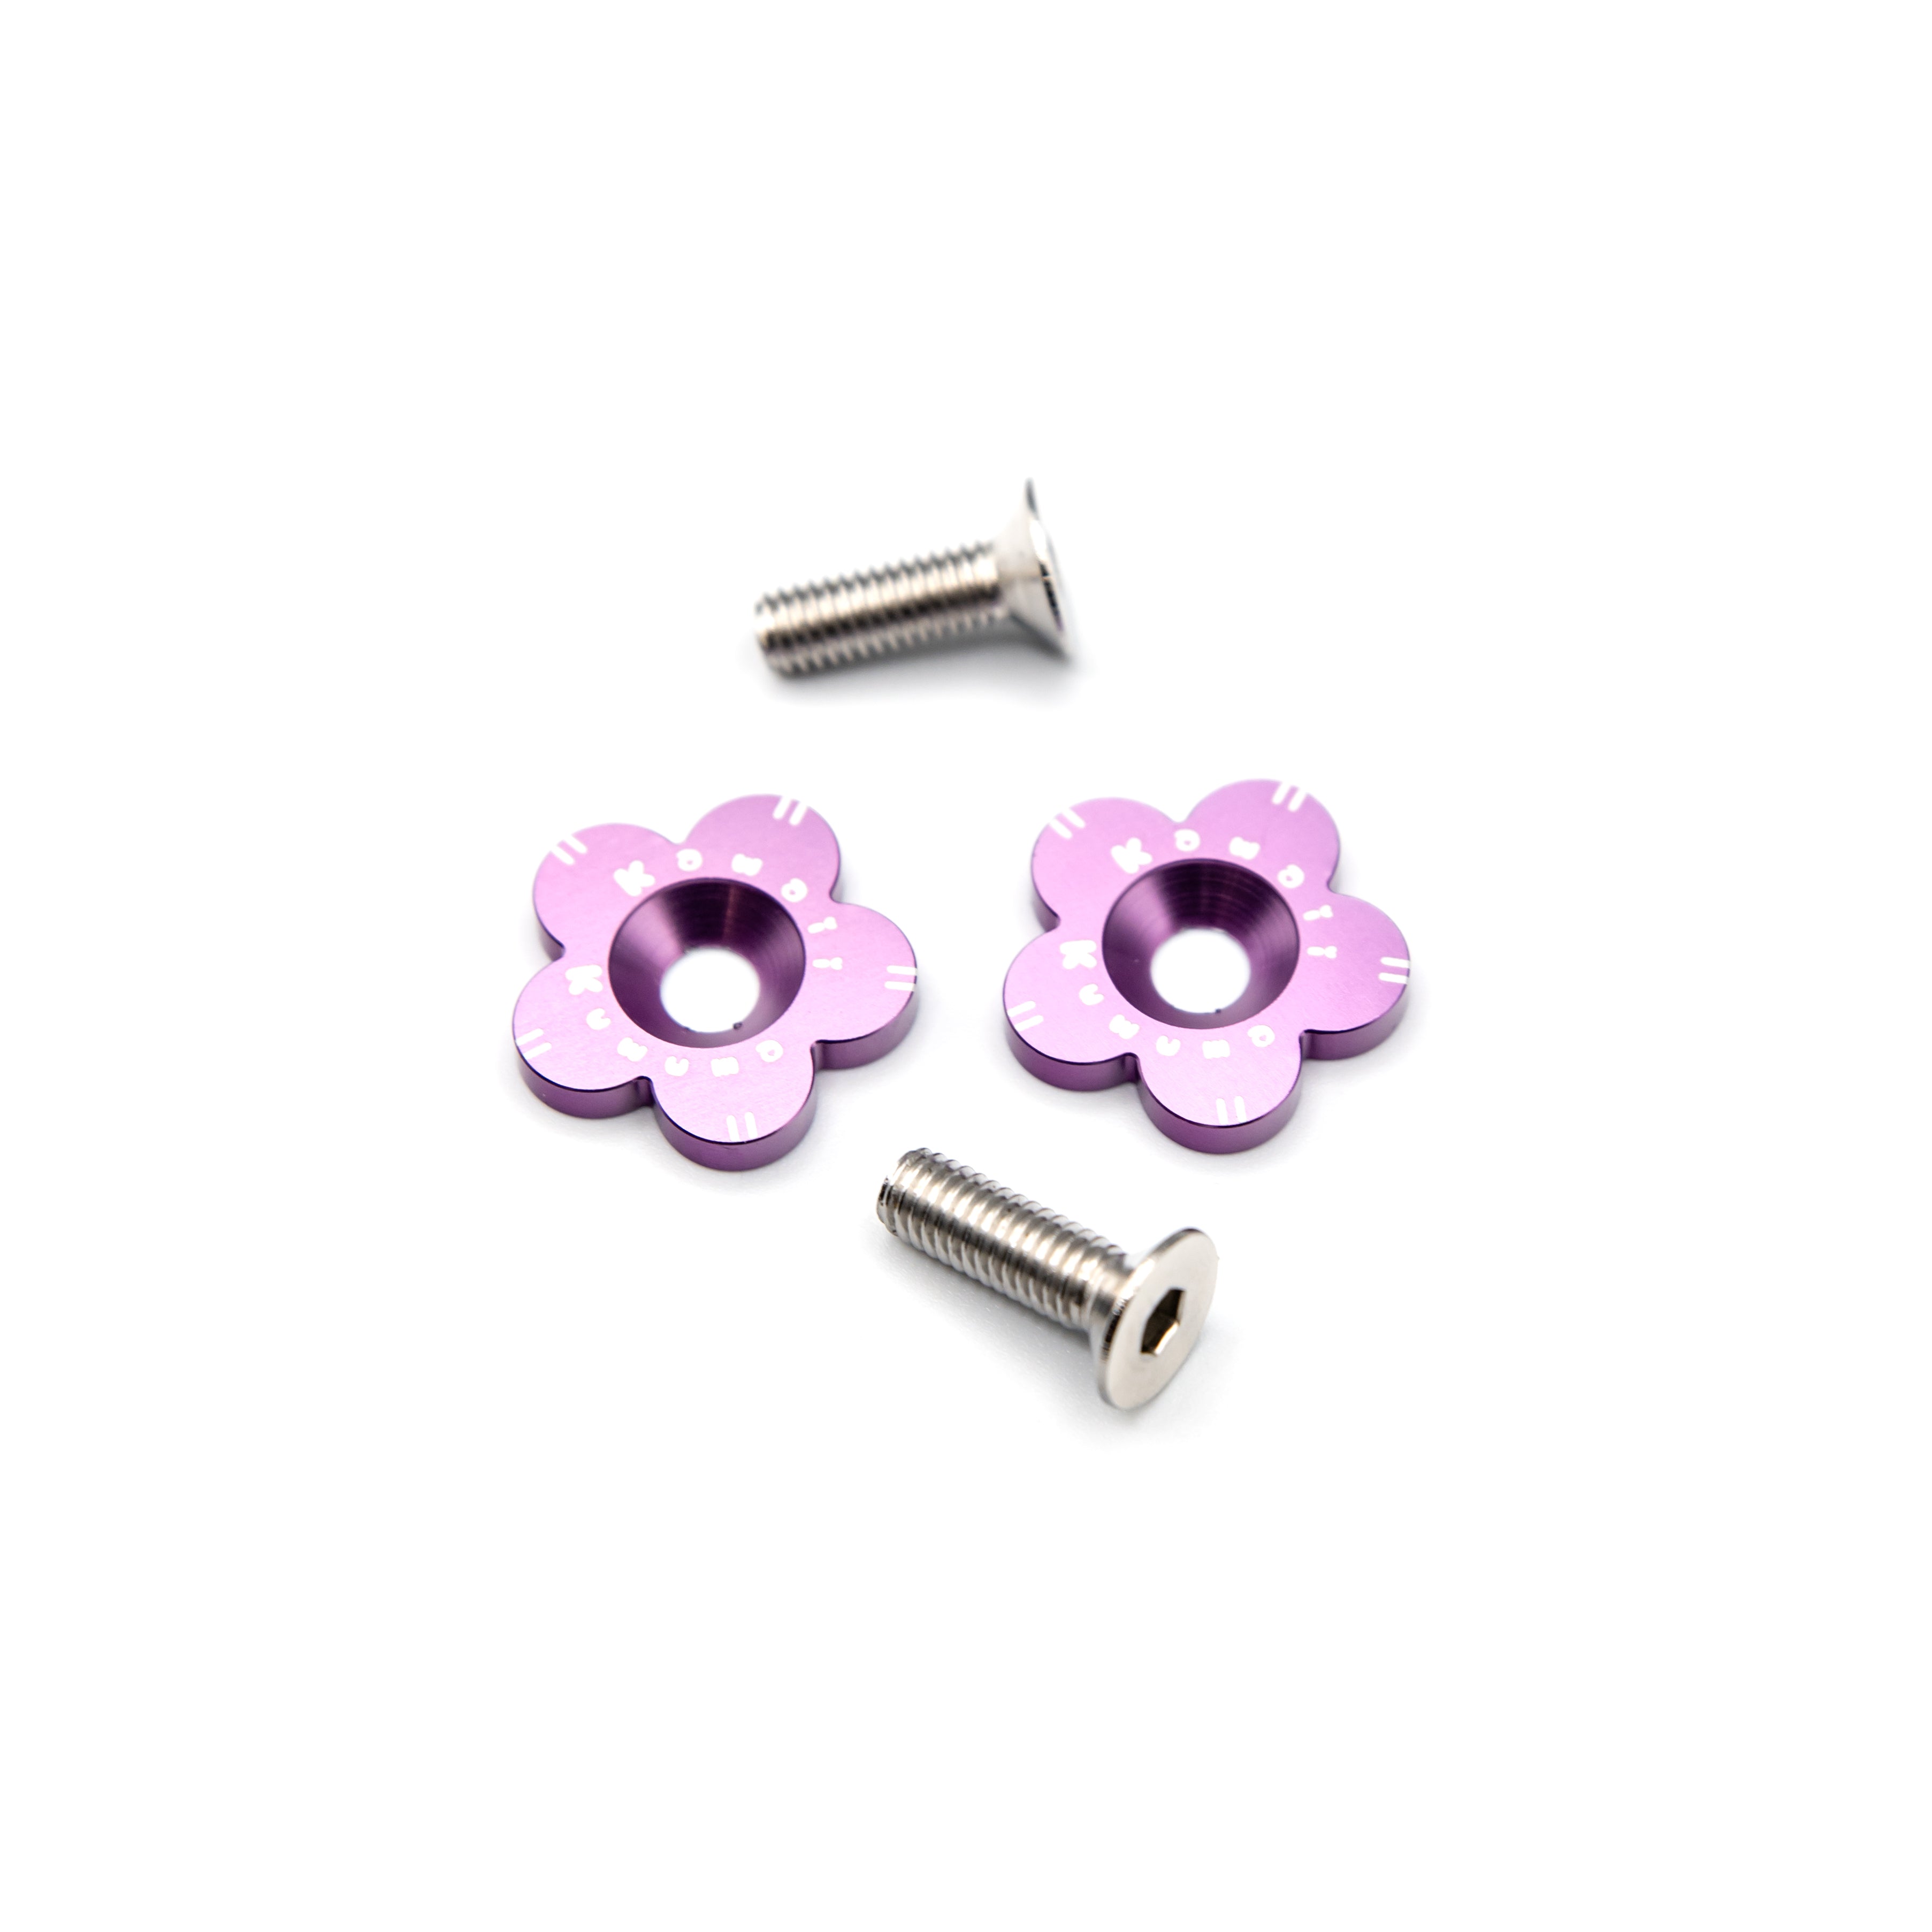 Flower shaped dress up hardware with m6 bolt. Purple flower shaped washer